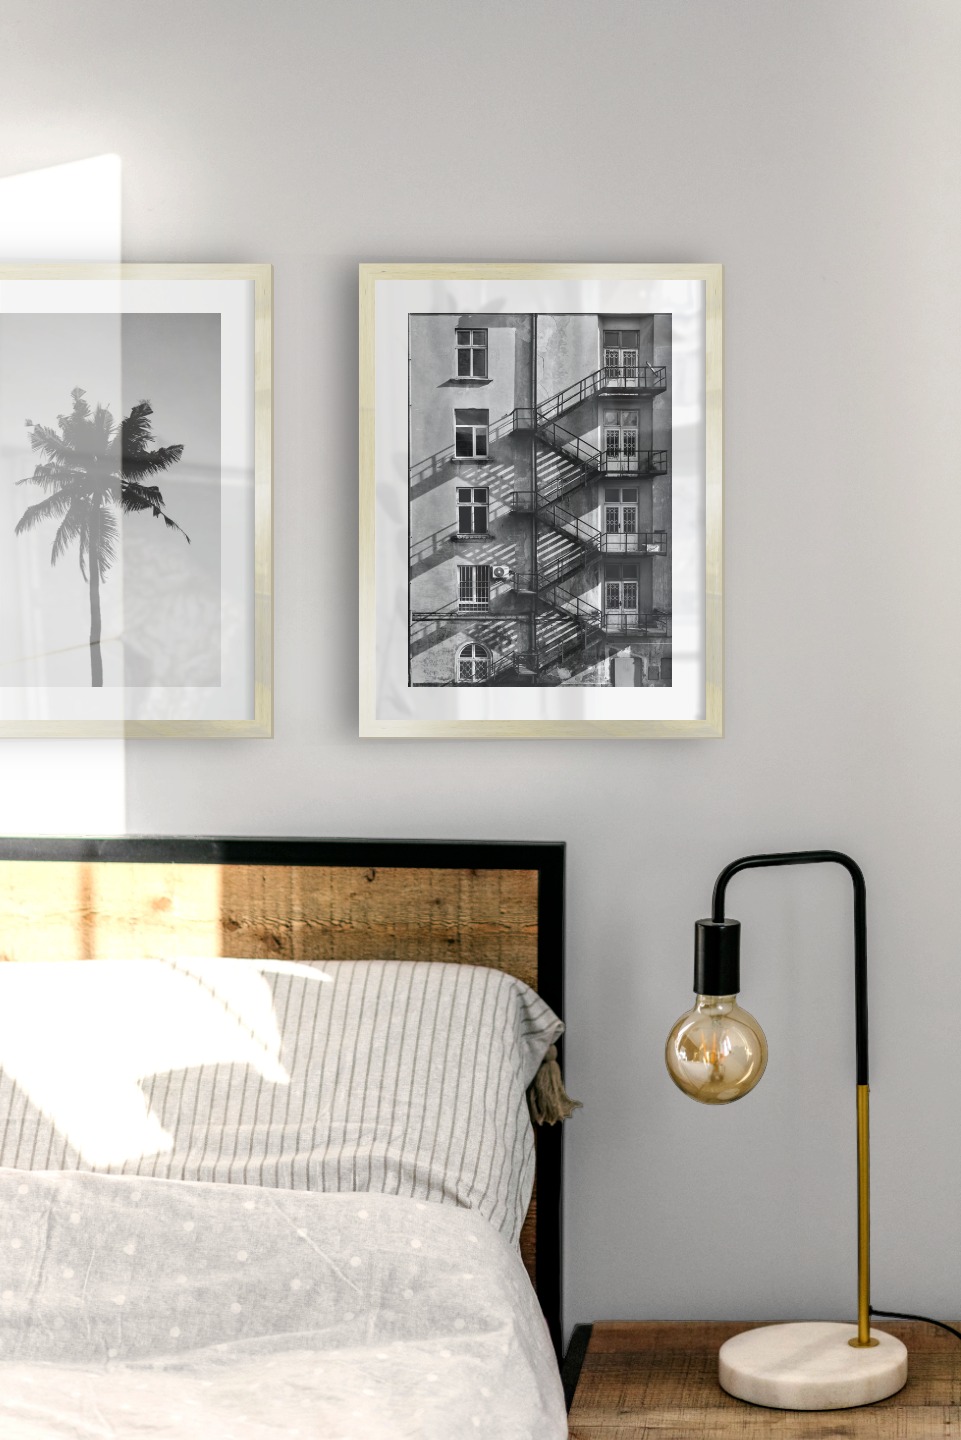 Gallery wall with picture frames in gold in sizes 30x40 with prints "Palm" and "Stairs on the facade"